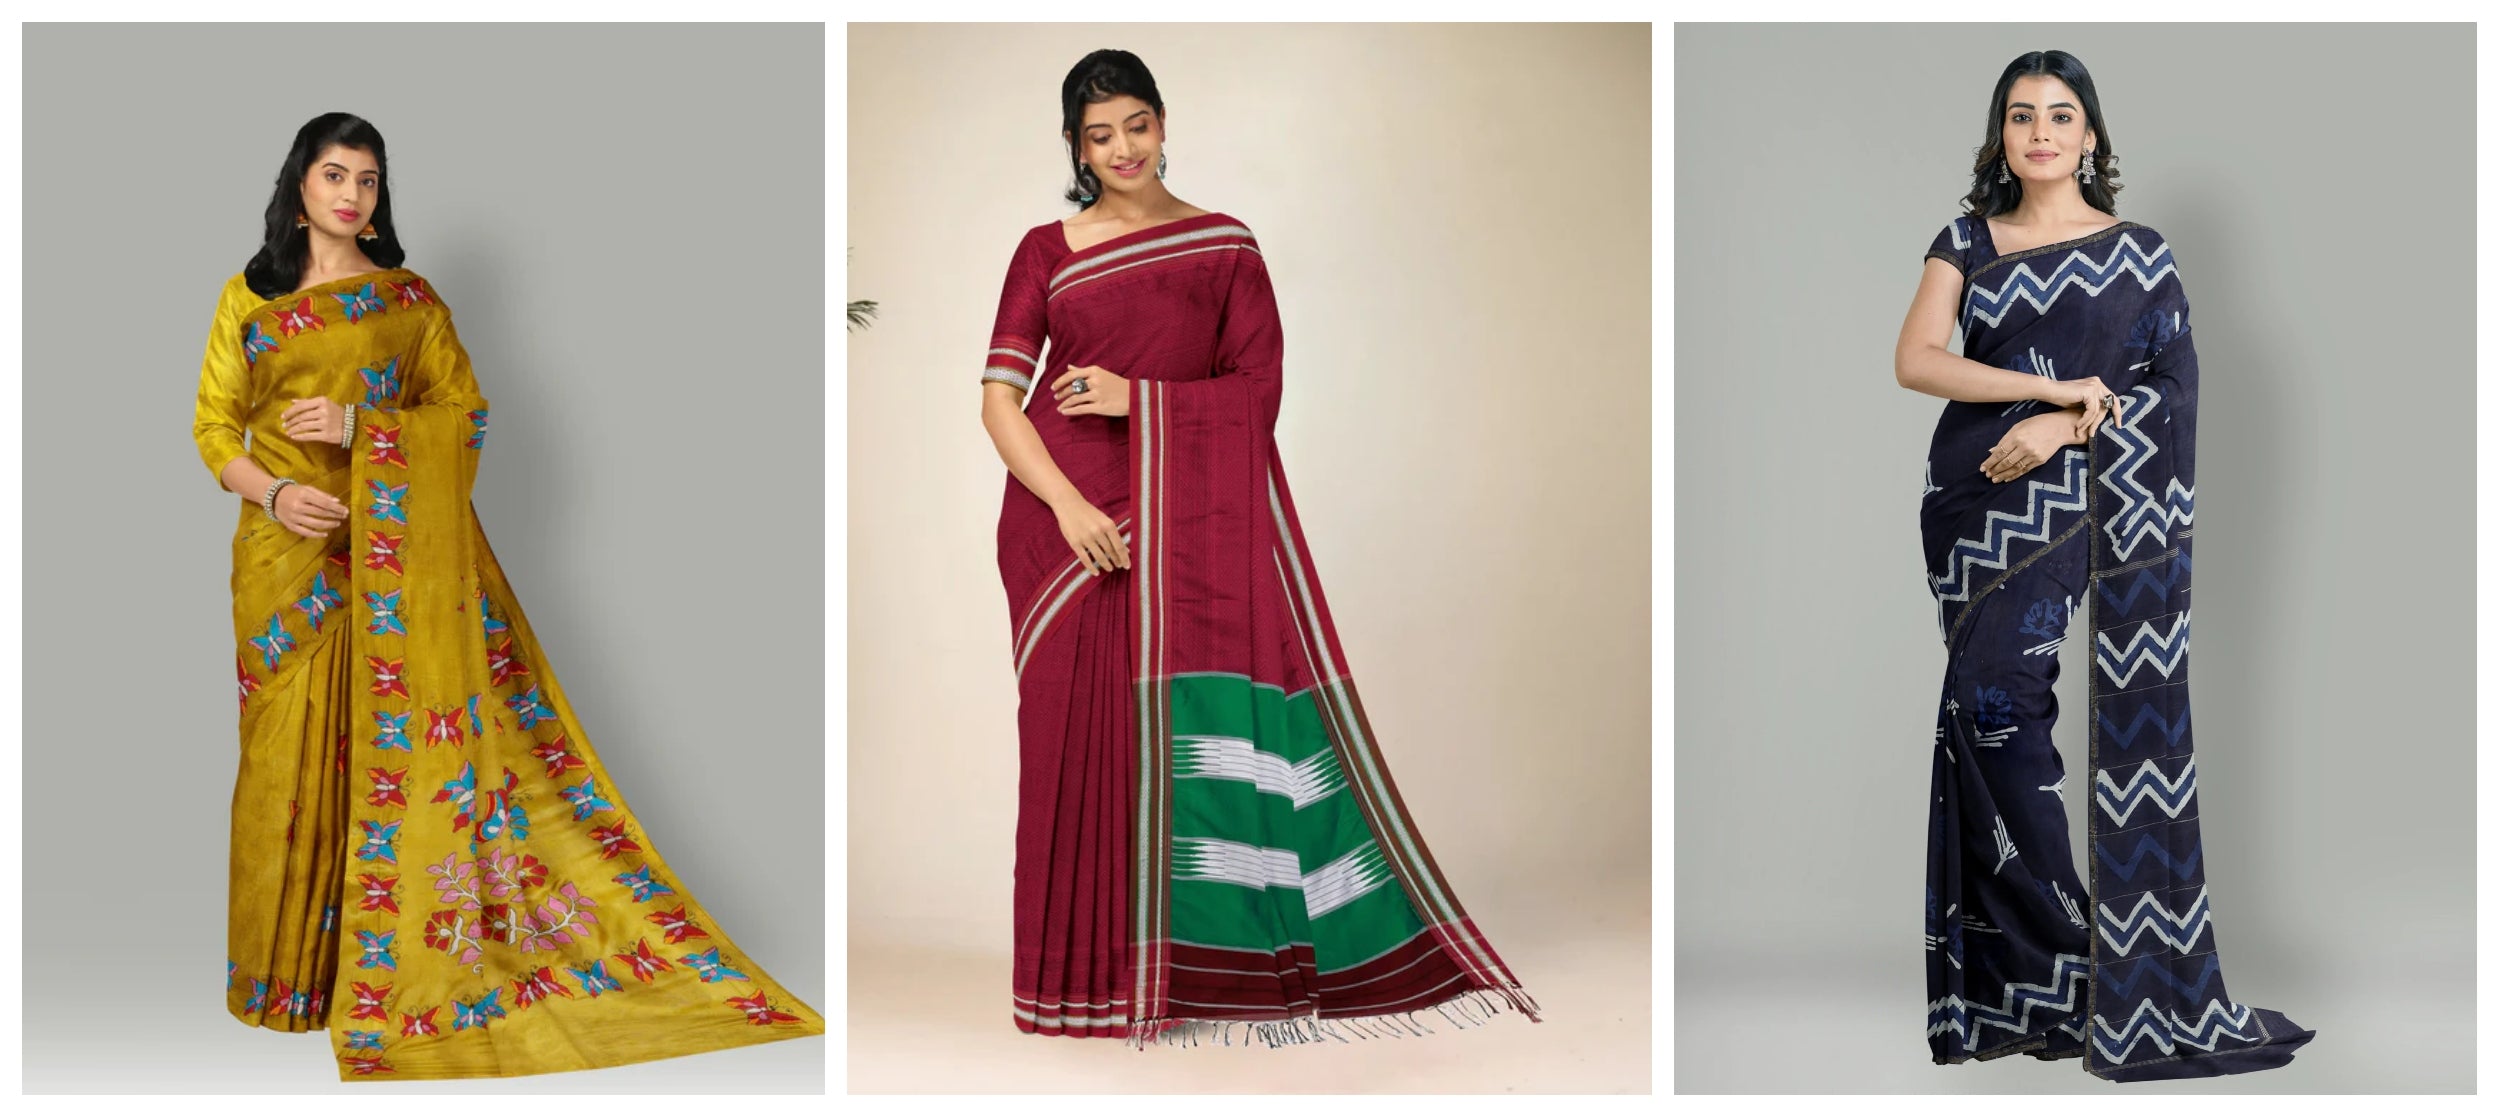 72 Different Types of Sarees from Different States of India (Part-II)